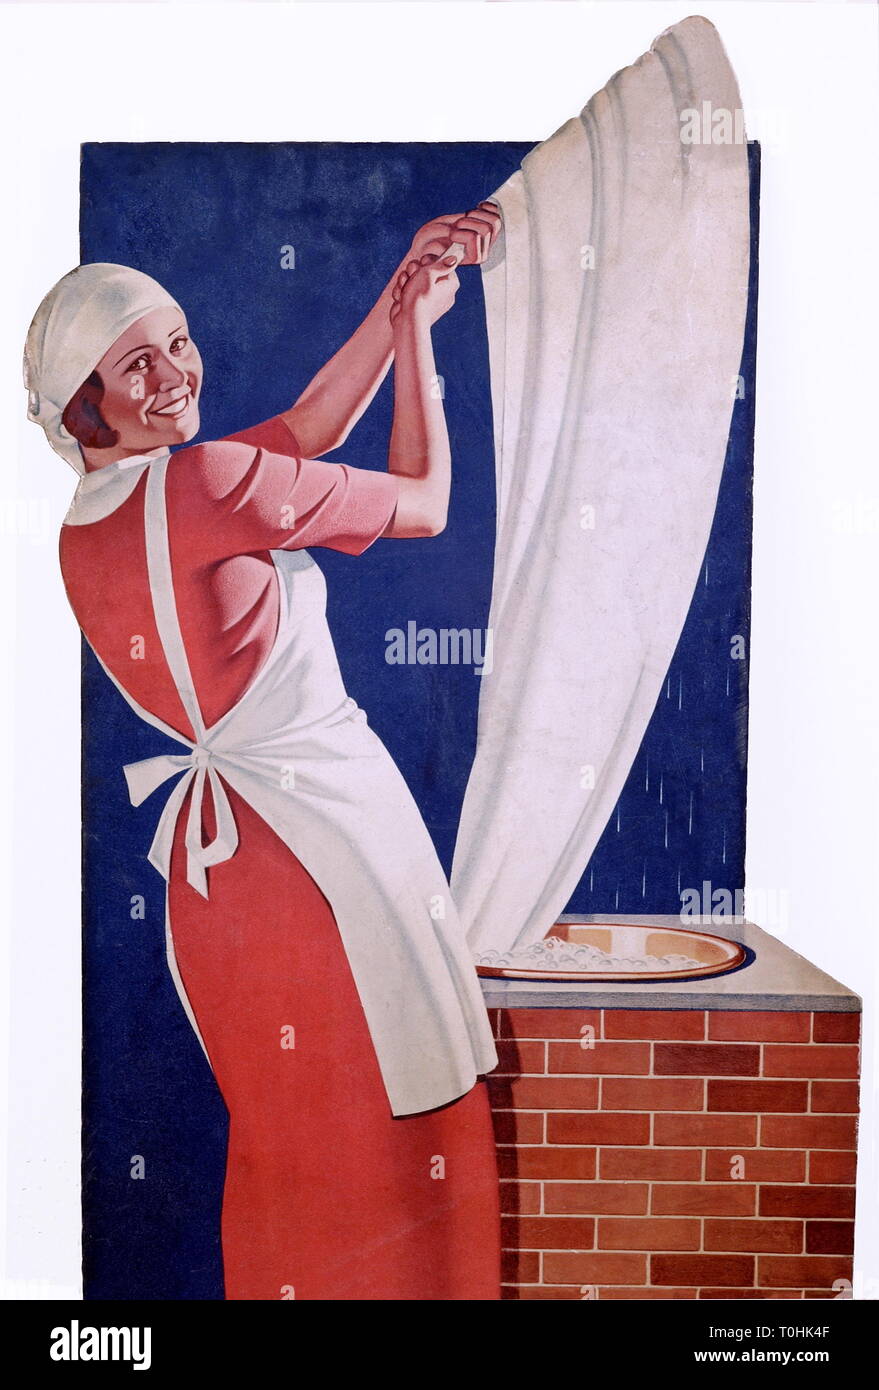 household, laundry, housewife with headscarf and white apron, fetching piece of laundry out of the leach, stand-up display, Germany, circa 1938, Additional-Rights-Clearance-Info-Not-Available Stock Photo